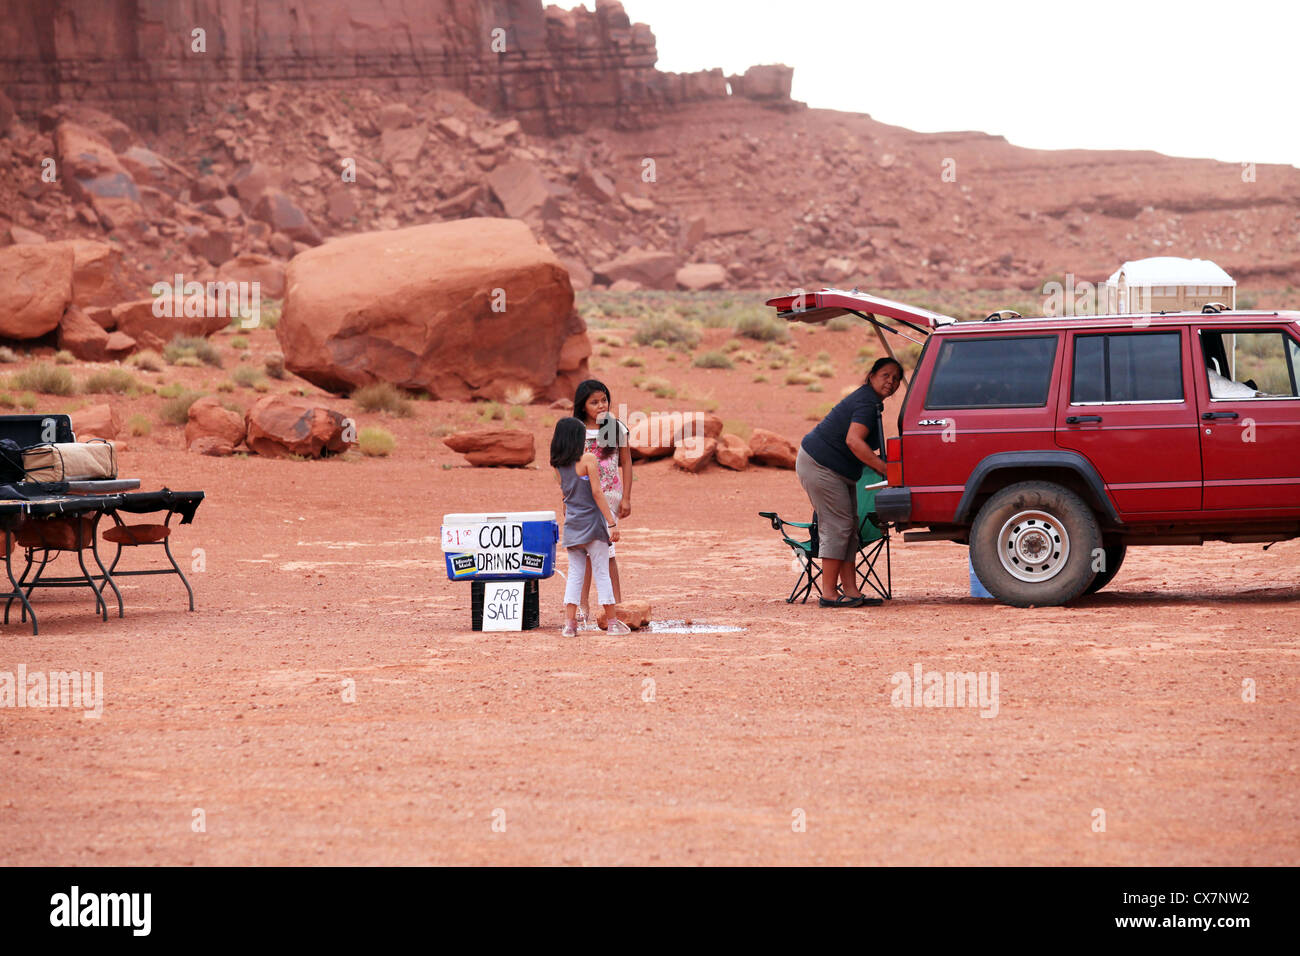 Native Navajo Indian family packing up trading goods advent approaching thunderstorm in Monument valley, Arizona, US Stock Photo